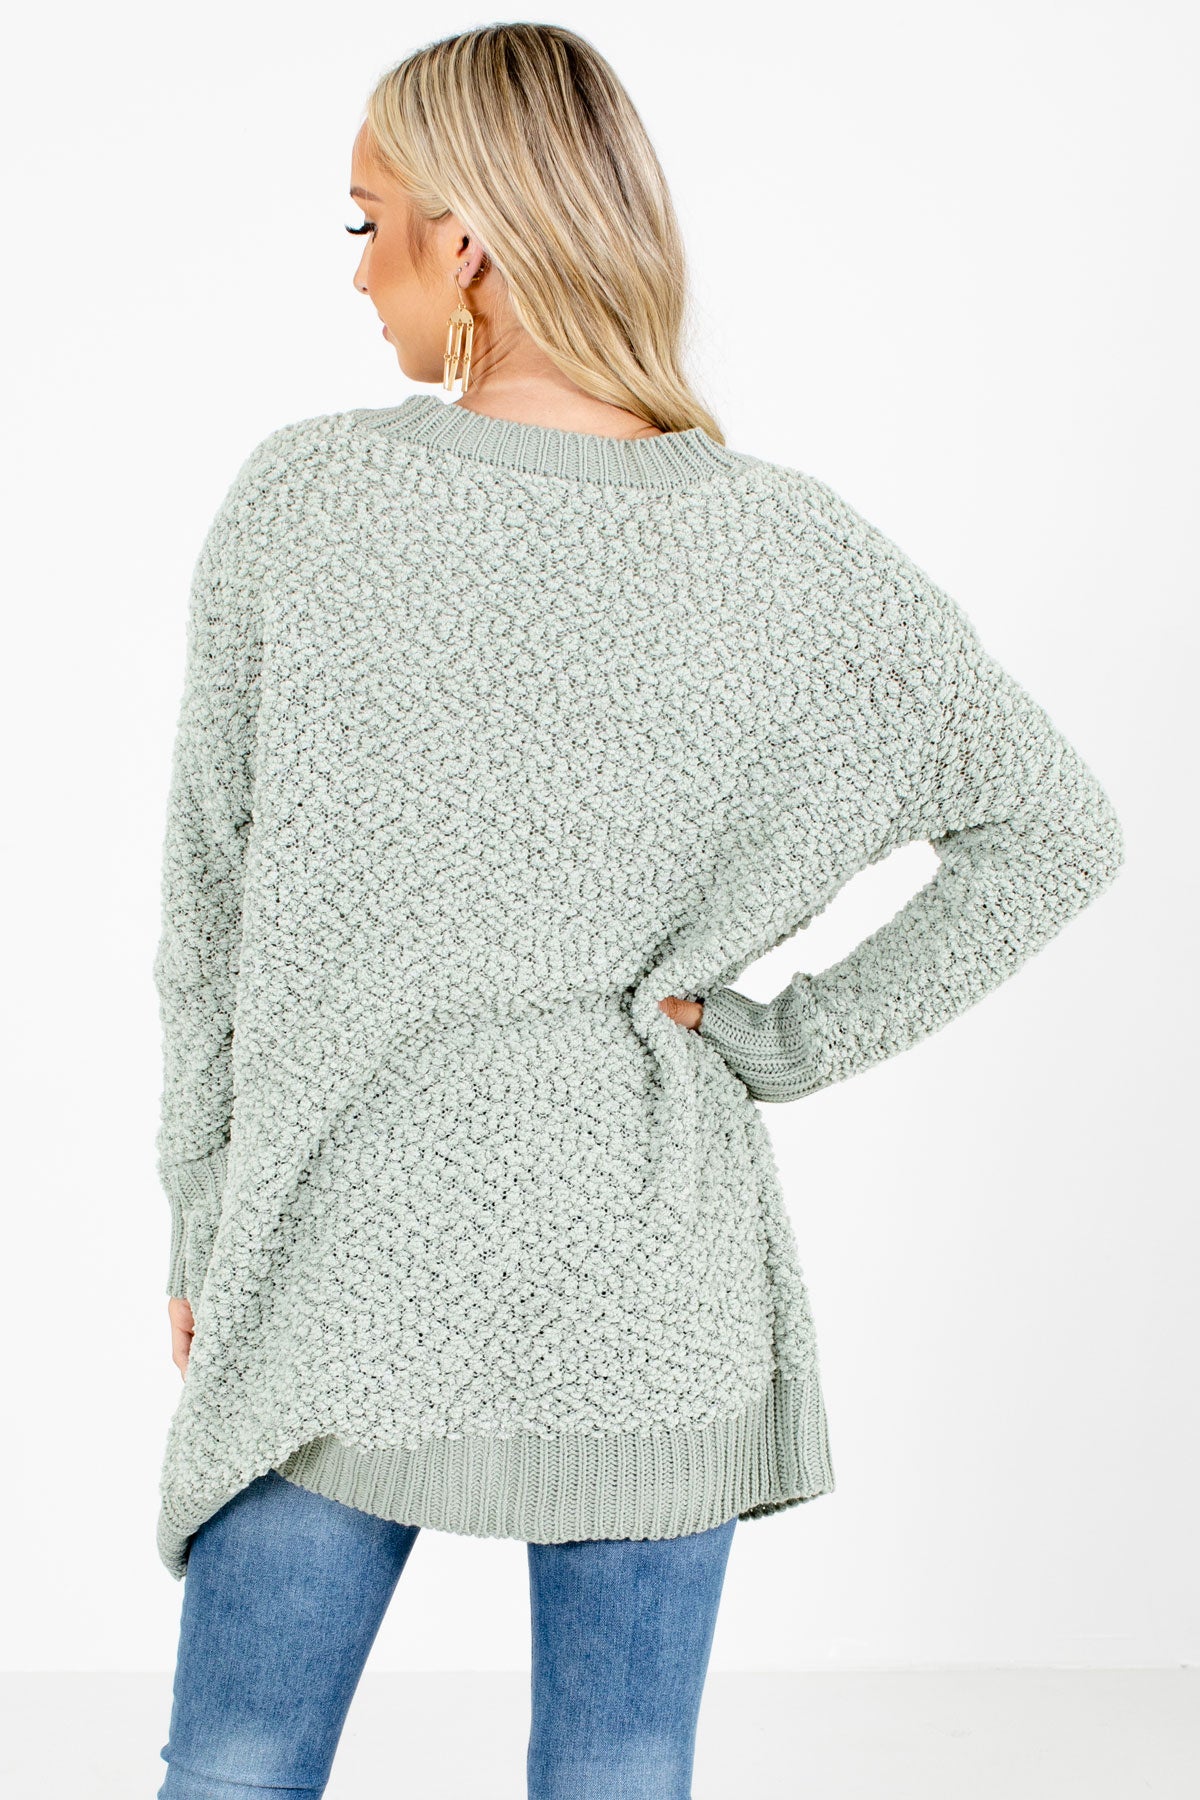 Women's Sage Green Cute and Comfortable Boutique Cardigan